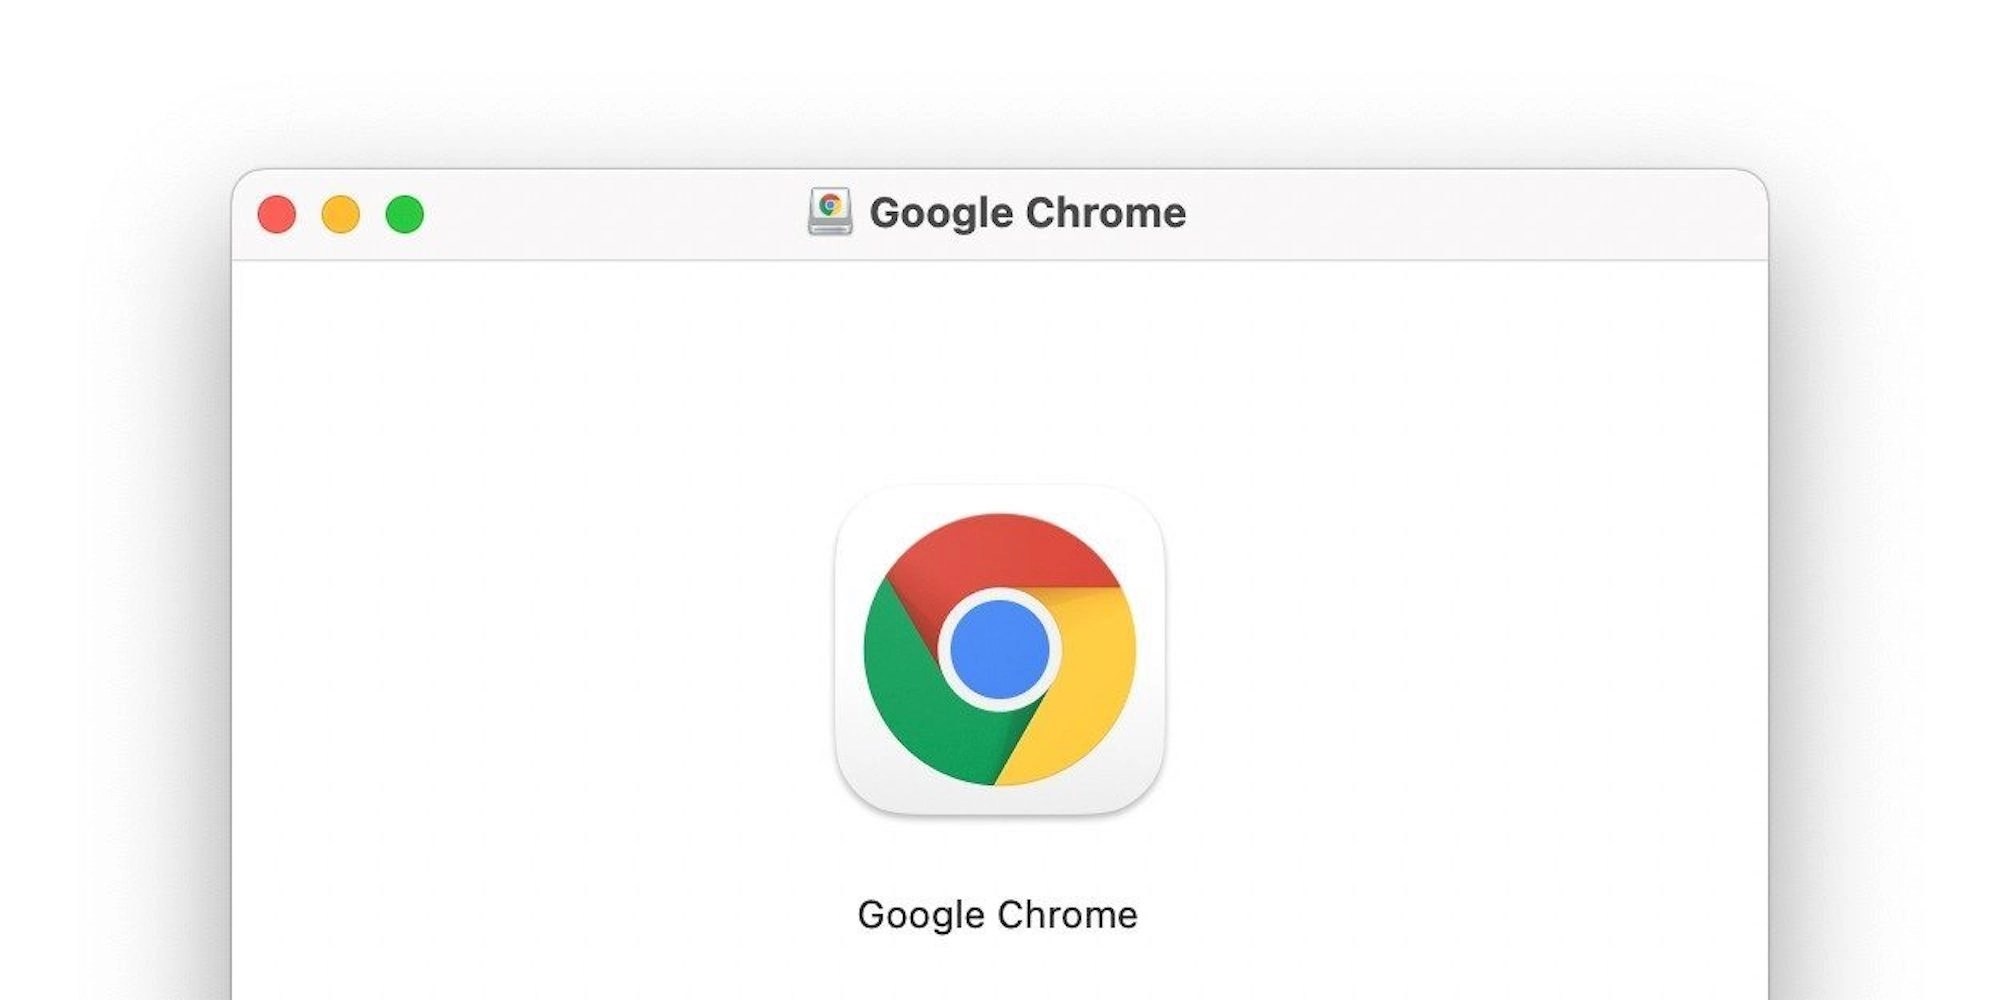 How To Update Google Chrome On Android, iPhone And PC